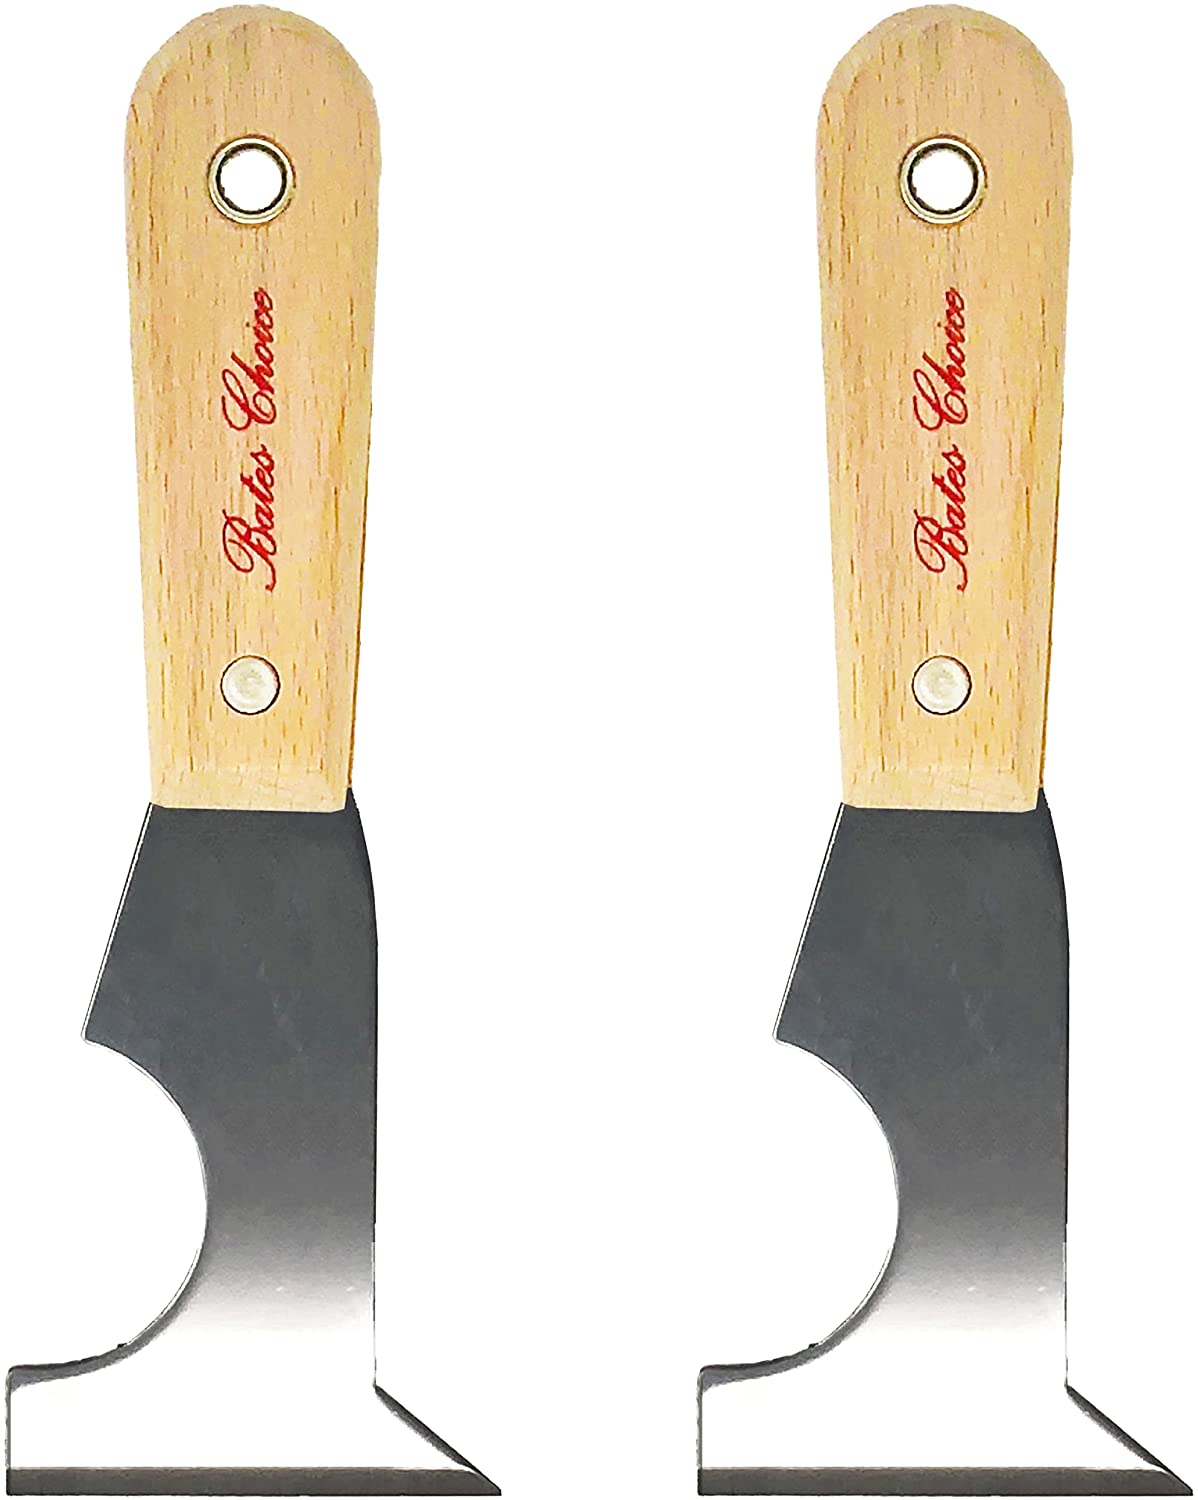 Bates- Paint Scraper, Taping knife, Pack of 2 Putty Knife Scraper, Scraper,  5 in 1 tools, Spackle Knife, Caulk Removal Tool - Bates Choice